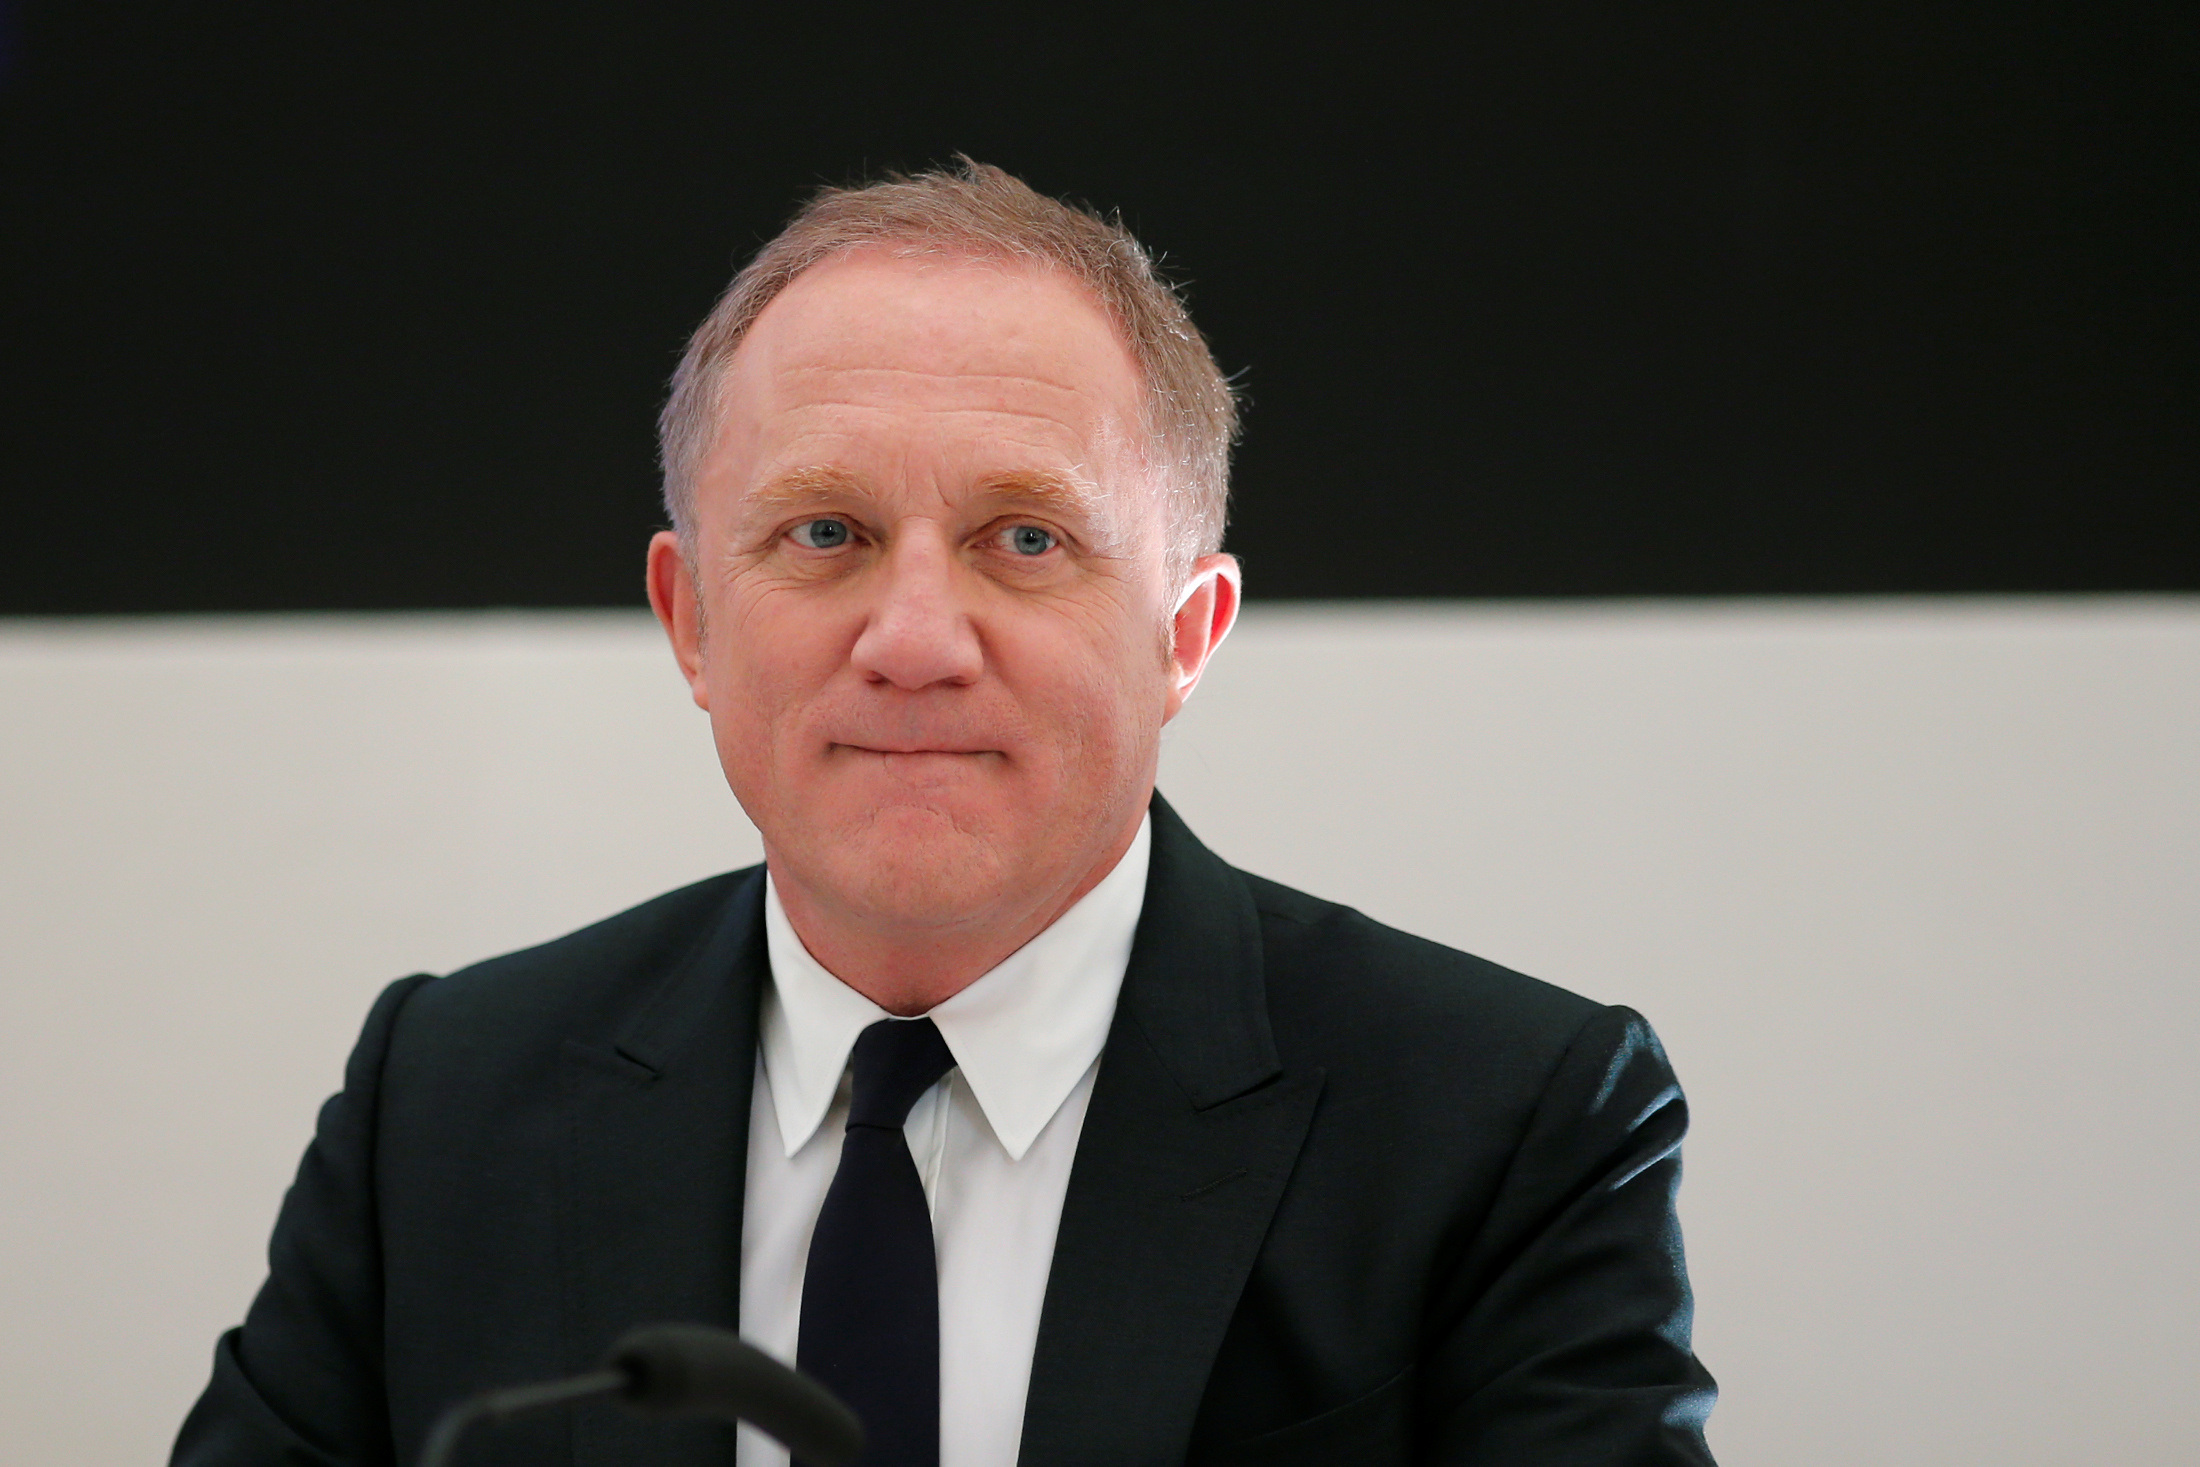 Francois-Henri Pinault, Chairman and CEO of Kering, attends a press conference on the annual report for 2016 of the French luxury goods holding company in Paris